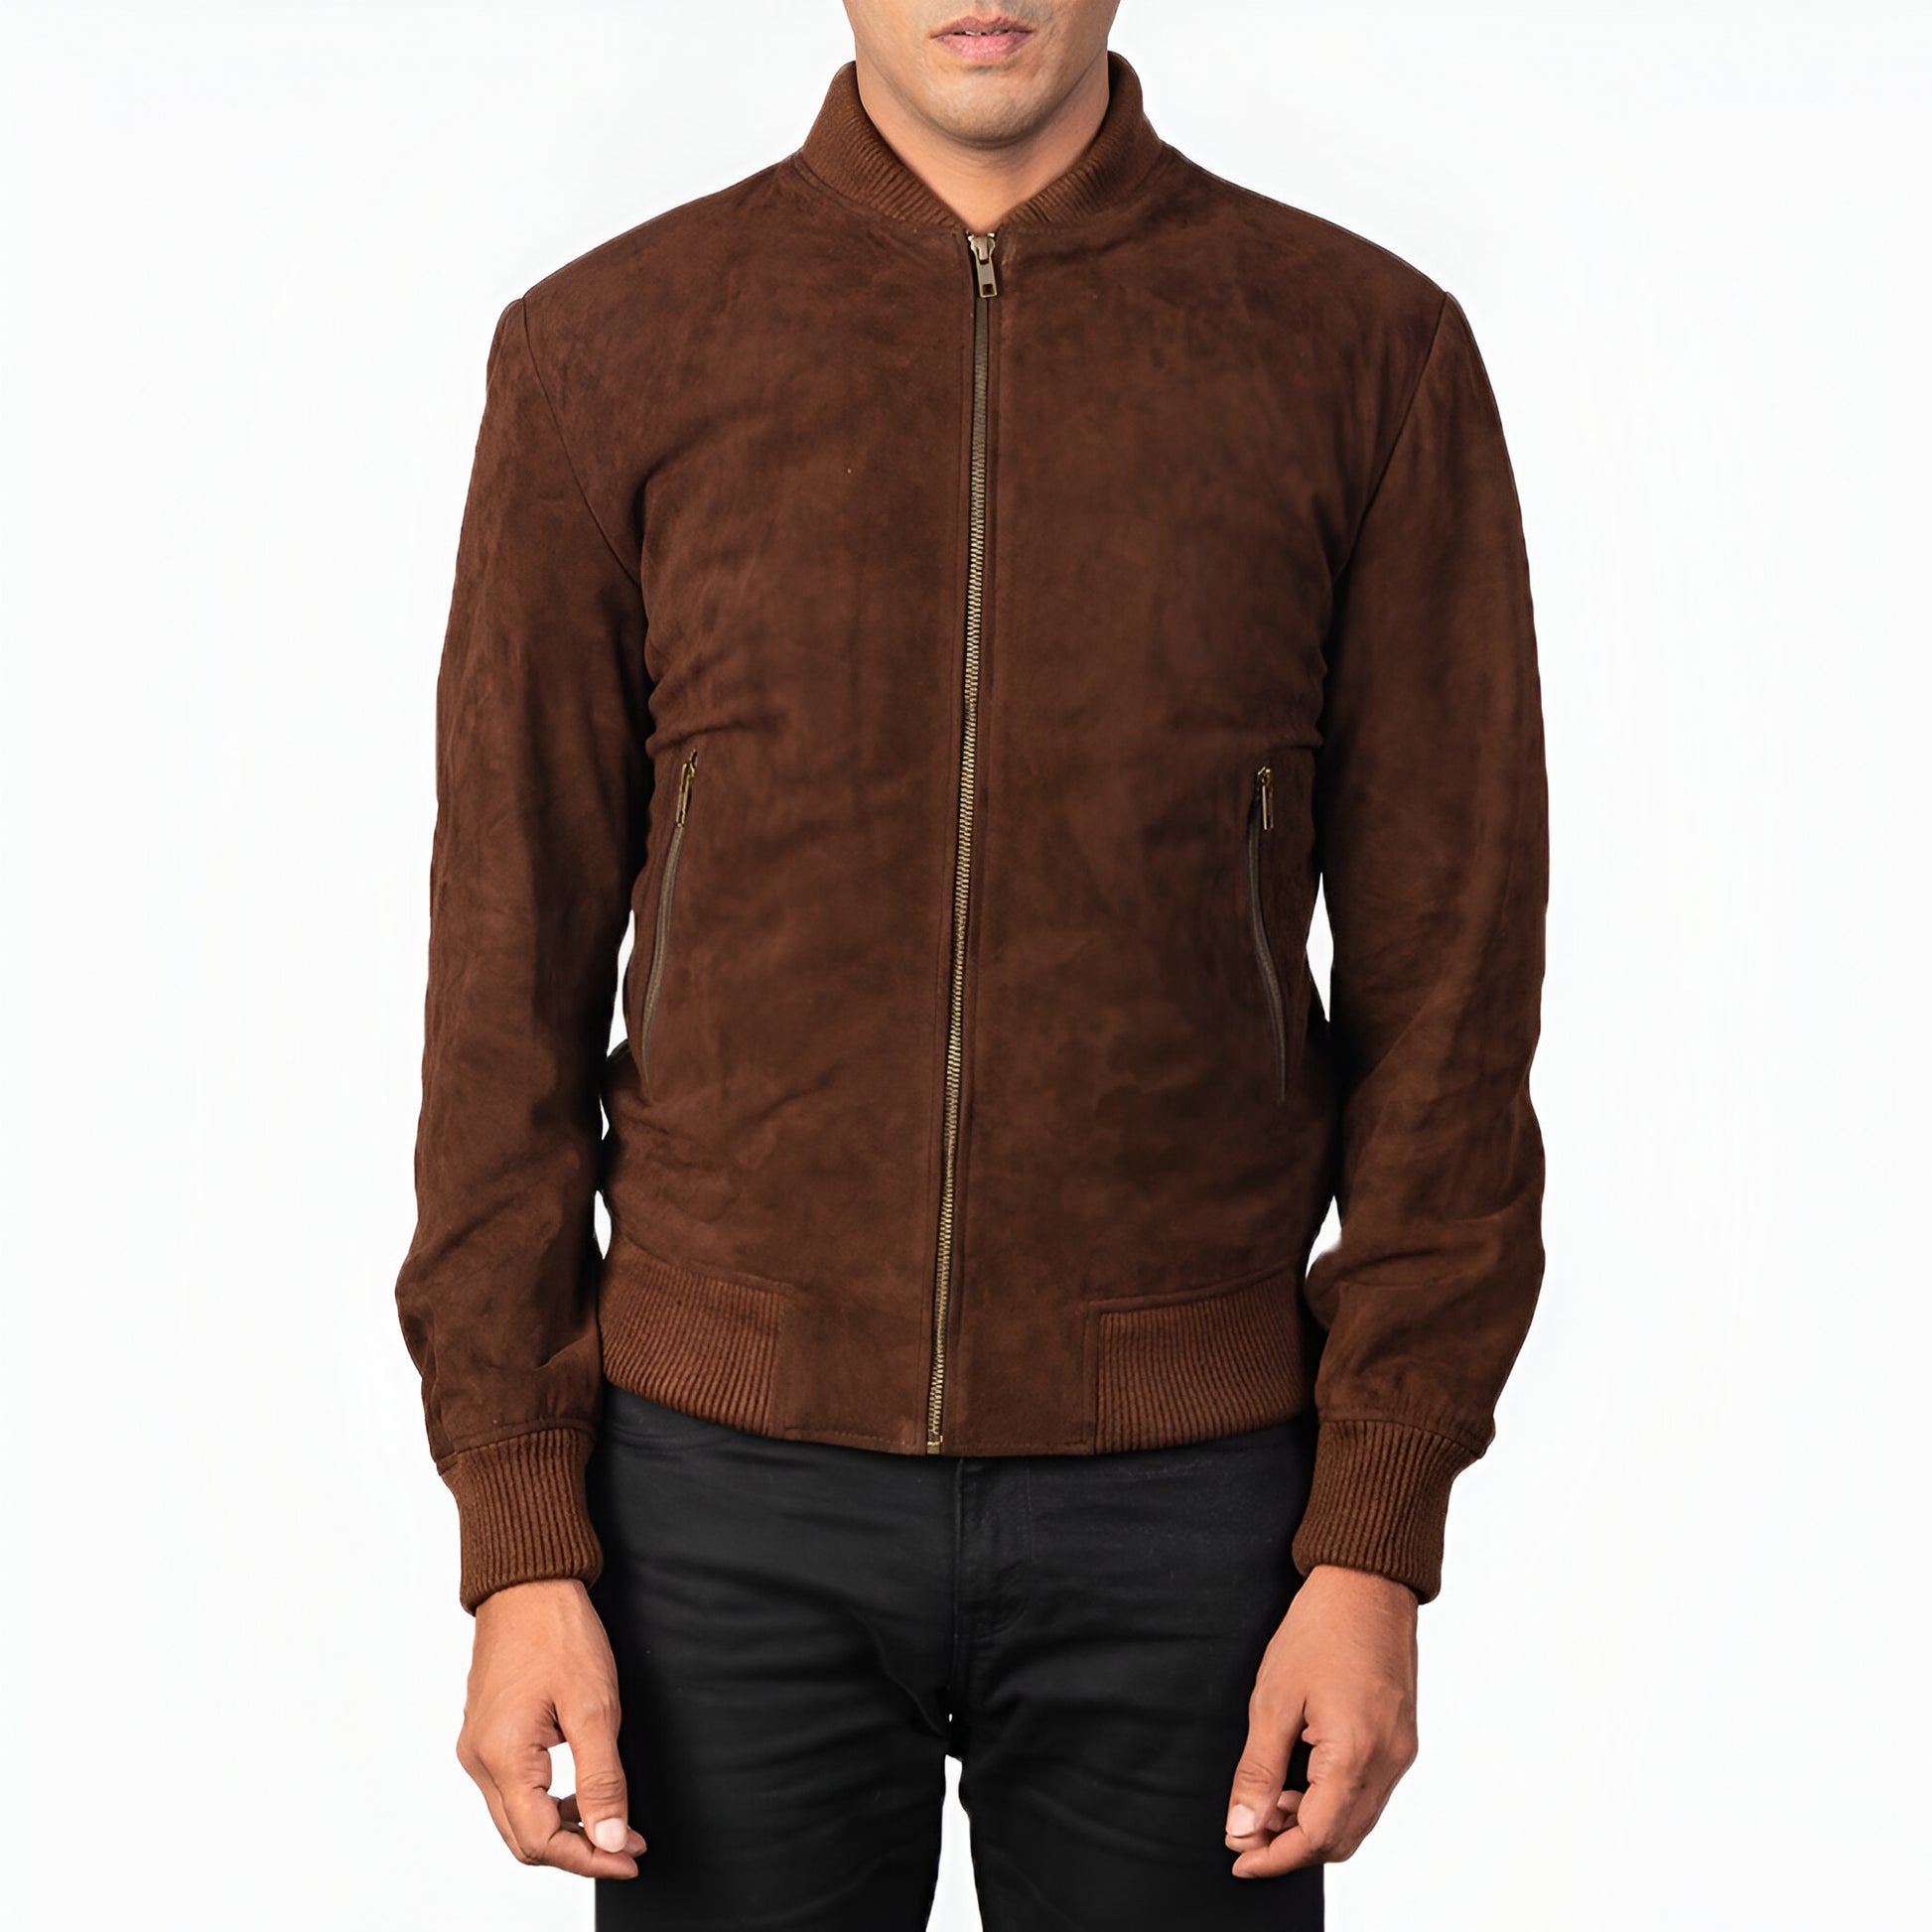 Tom Brown Suede Leather Bomber Jacket